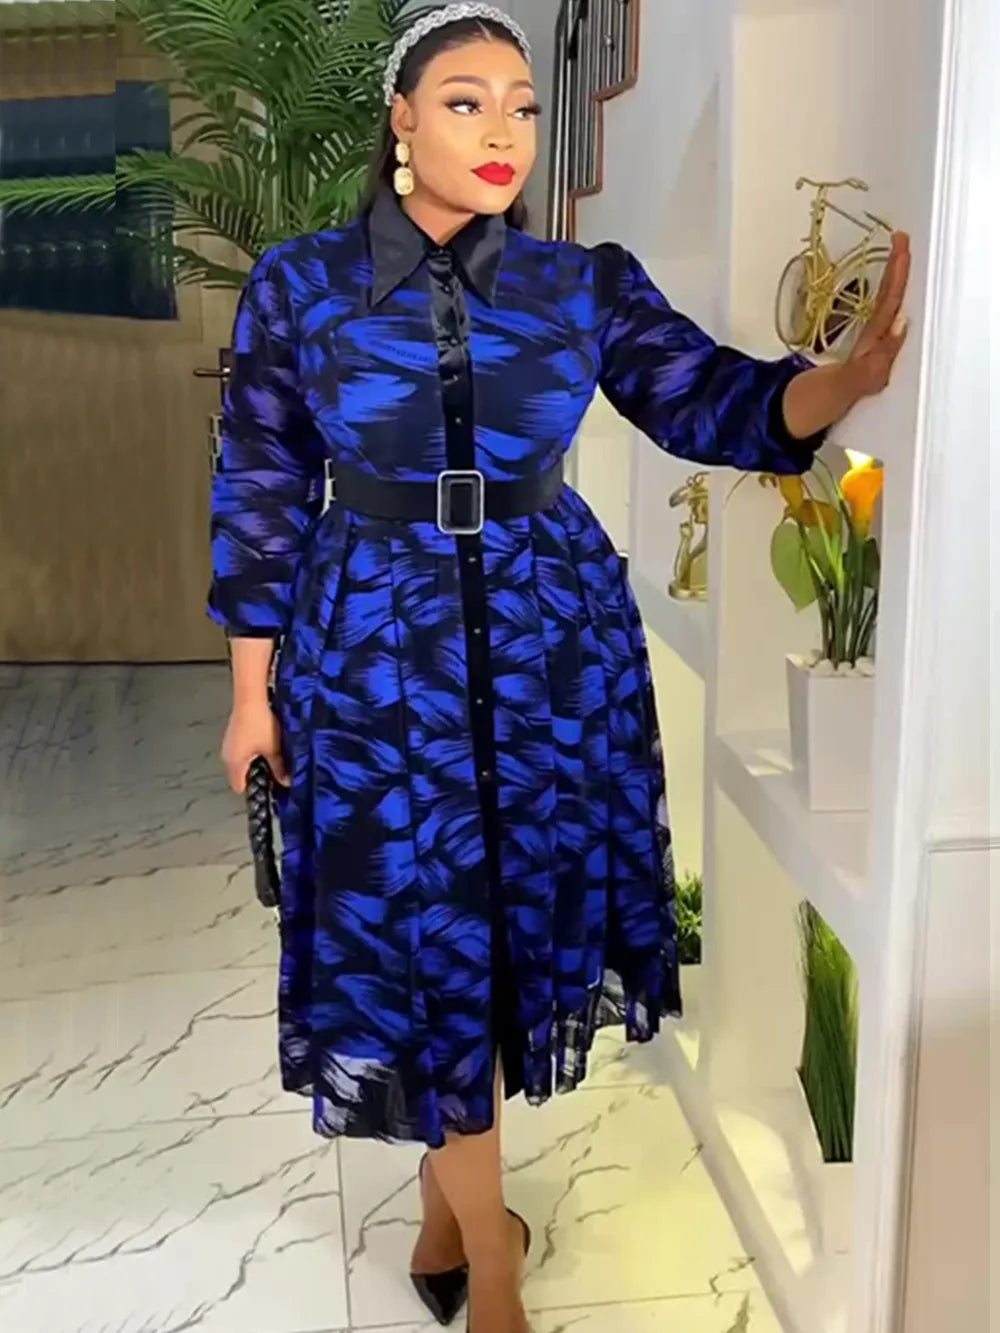 Elegant African Dresses for Women Long Sleeve Africa Clothing Plus Size - Flexi Africa - Flexi Africa offers Free Delivery Worldwide - Vibrant African traditional clothing showcasing bold prints and intricate designs